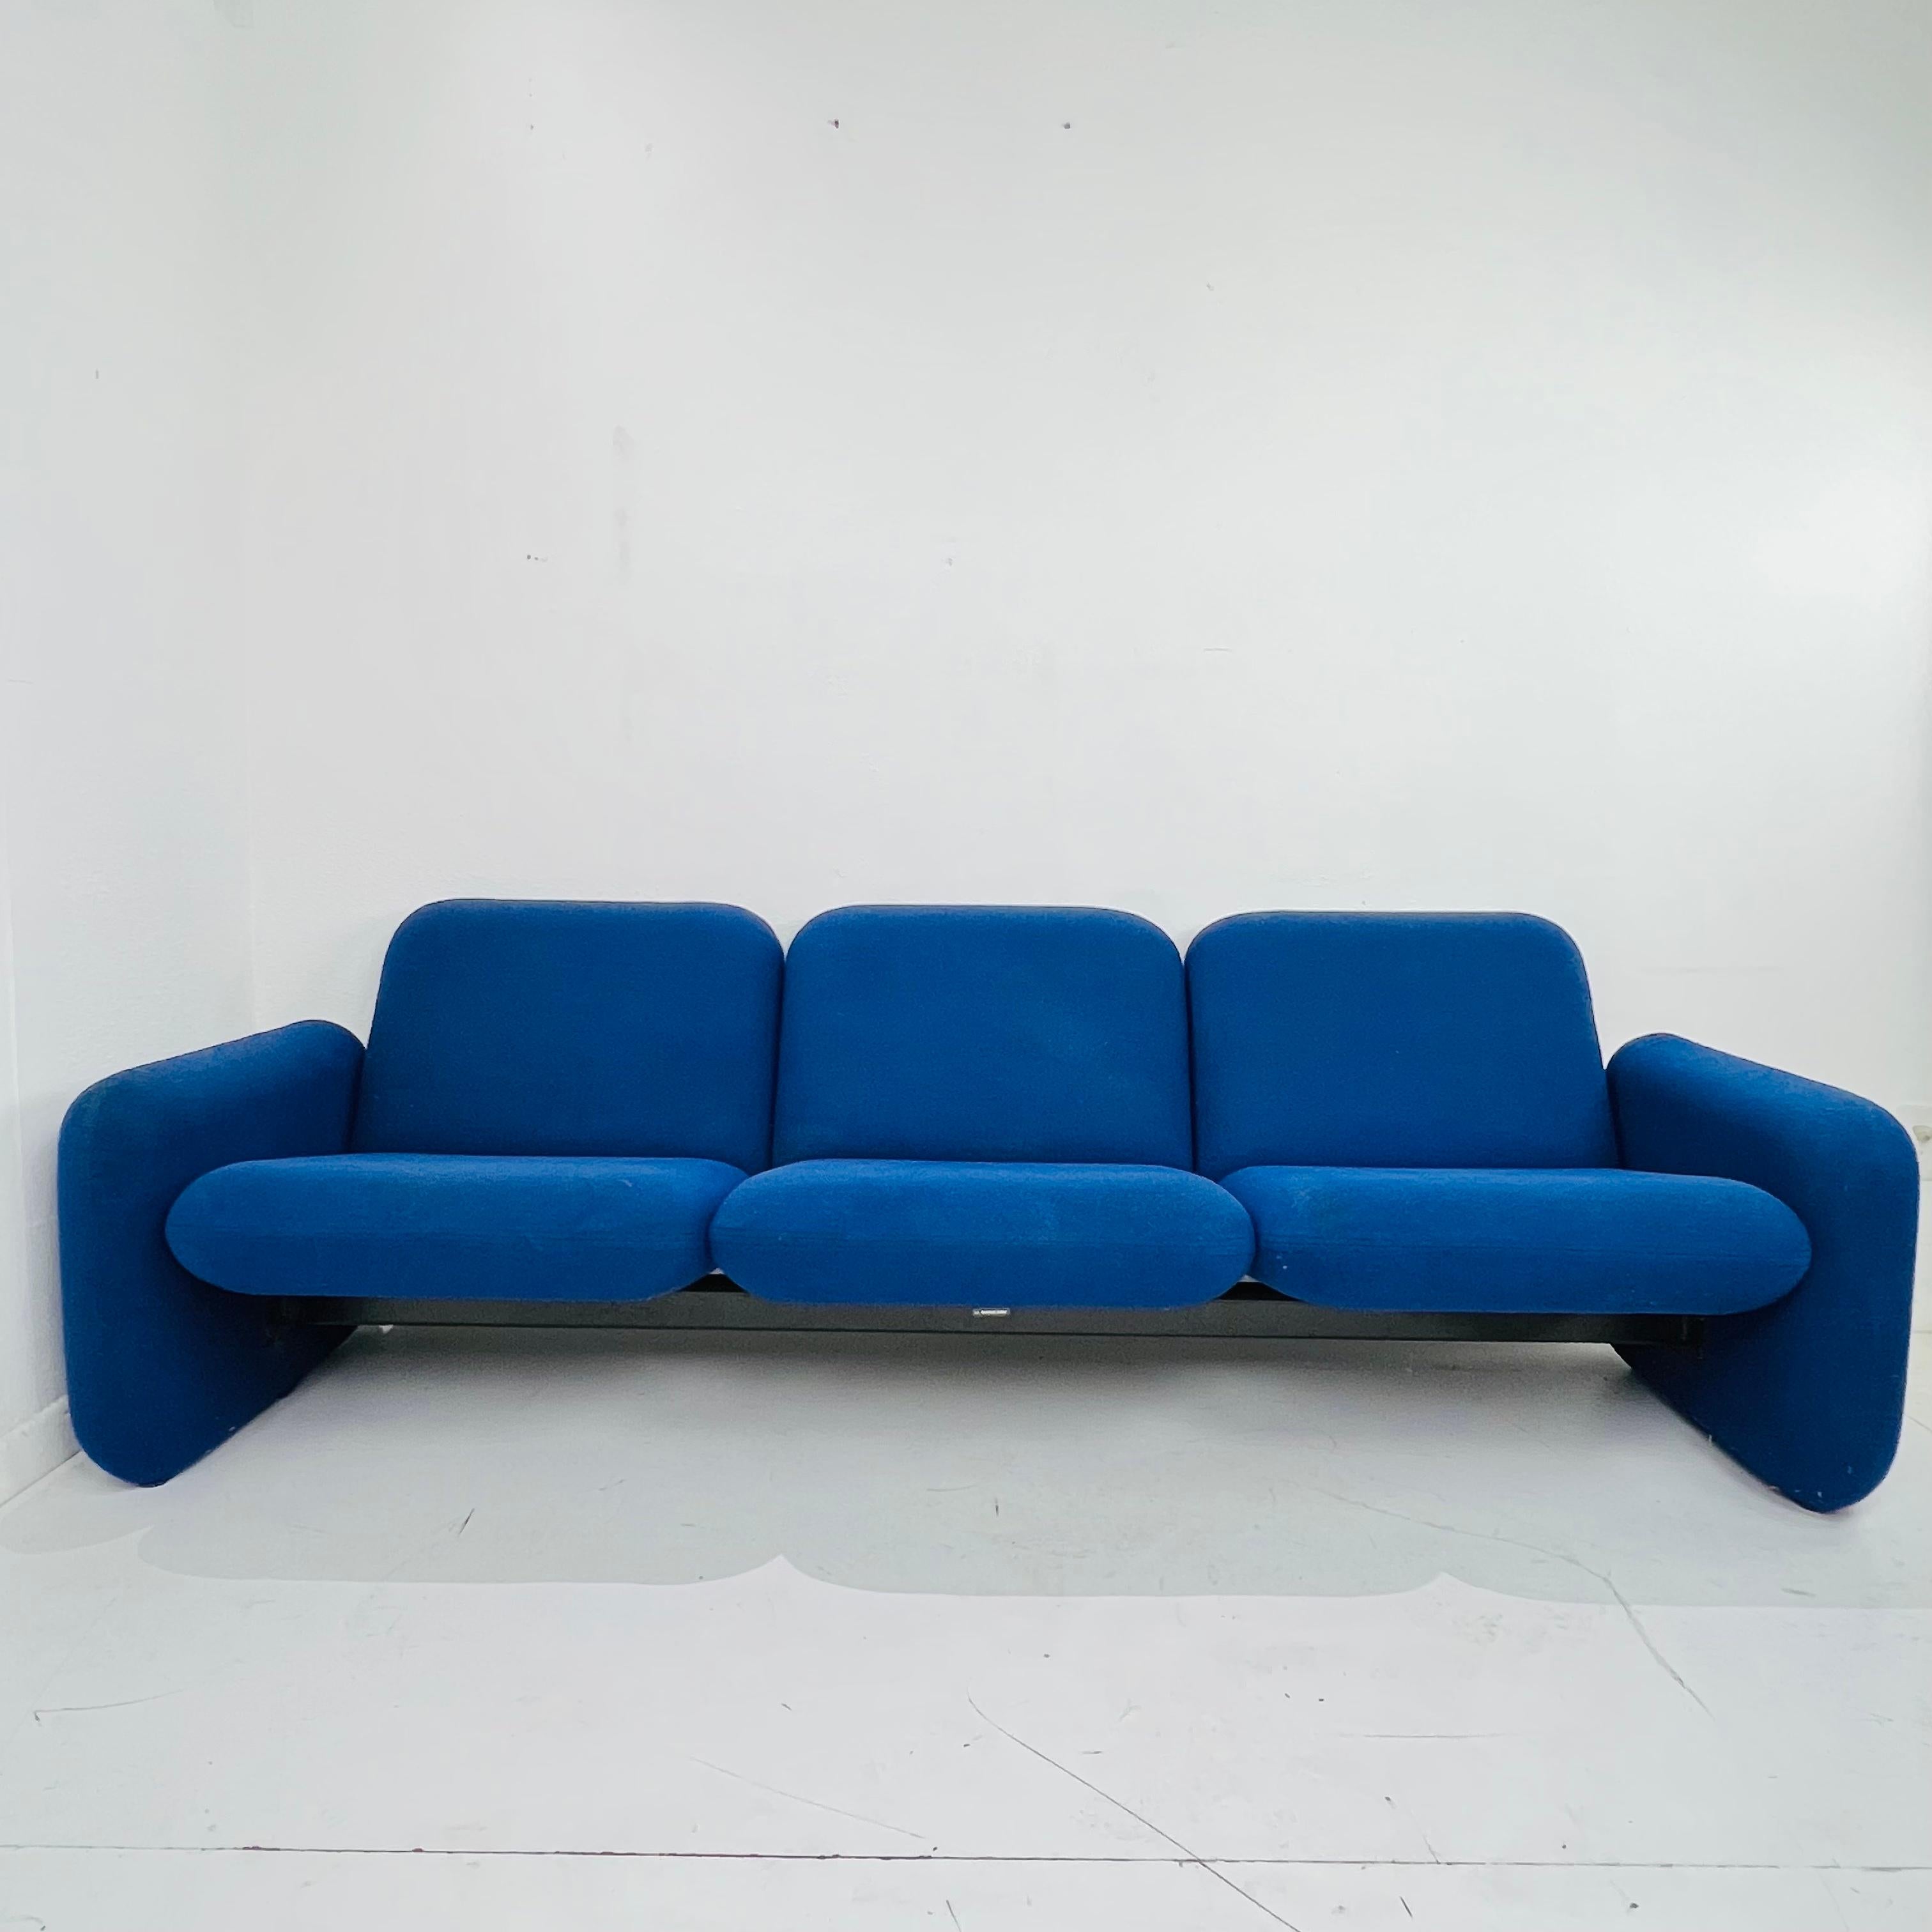 Designed by Ray Wilkes for Herman Miller and first introduced in 1976, this eye-catching modular sofa made a lasting impression with bold, rounded-edge cushions and steel brackets that join the seat and back to allow for independent flexibility that